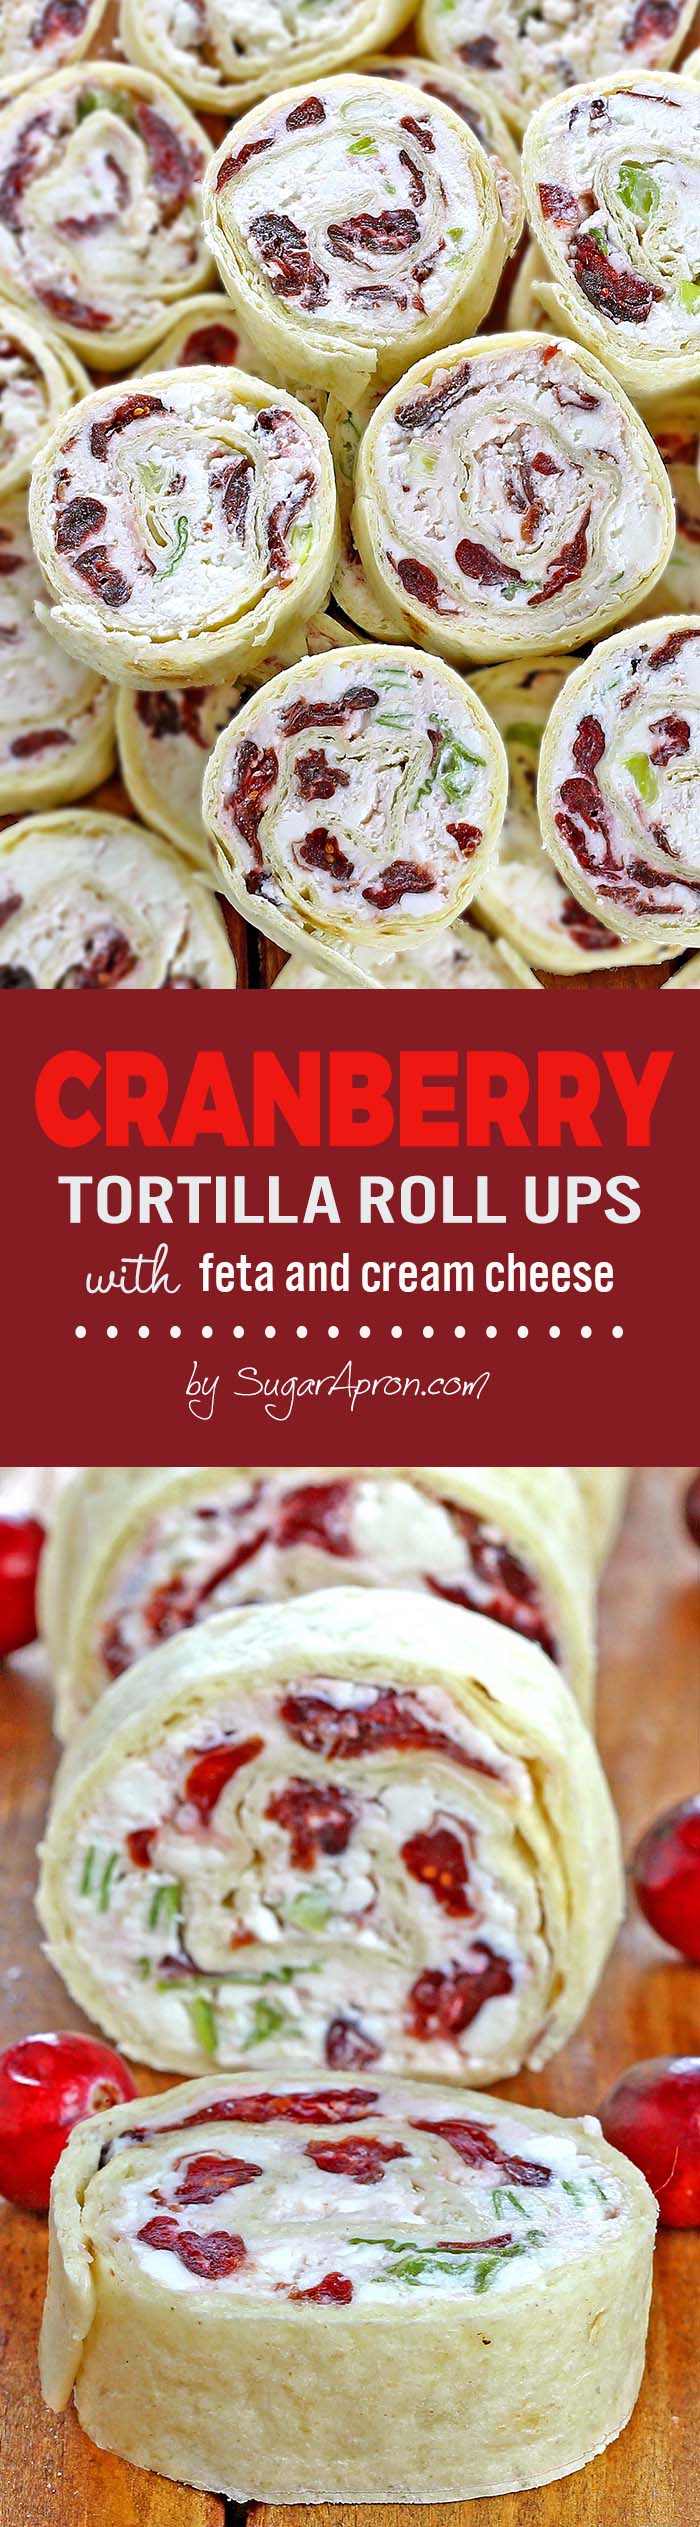 Festive red, green, and white - Cranberry Feta Tortilla Roll Ups are a absolute must make for Christmas or New Year's Eve get together.